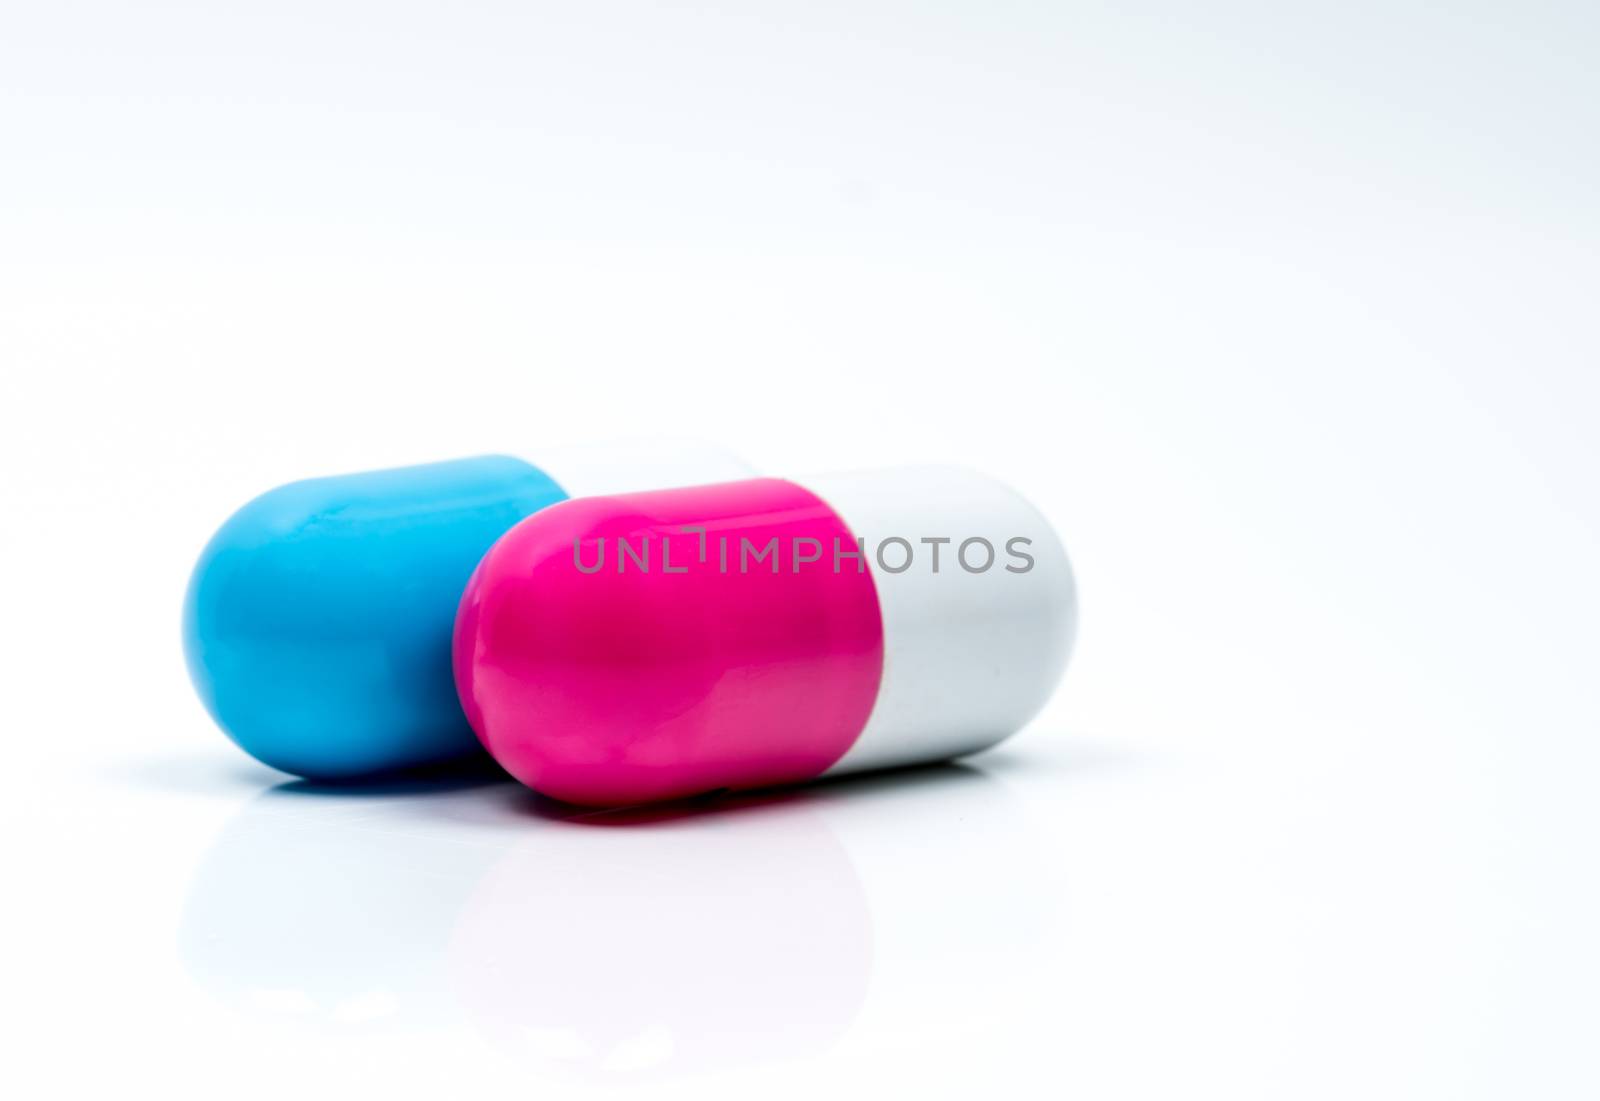 Two capsule pills isolated on white background. Global healthcare concept. Pharmacy sign and symbol. Pharmaceutical industry. Pharmacy background. Global healthcare concept. Antibiotic or antimicrobial drug resistance. Health budgets and policy. Blue-white and pink-white antibiotic capsule.